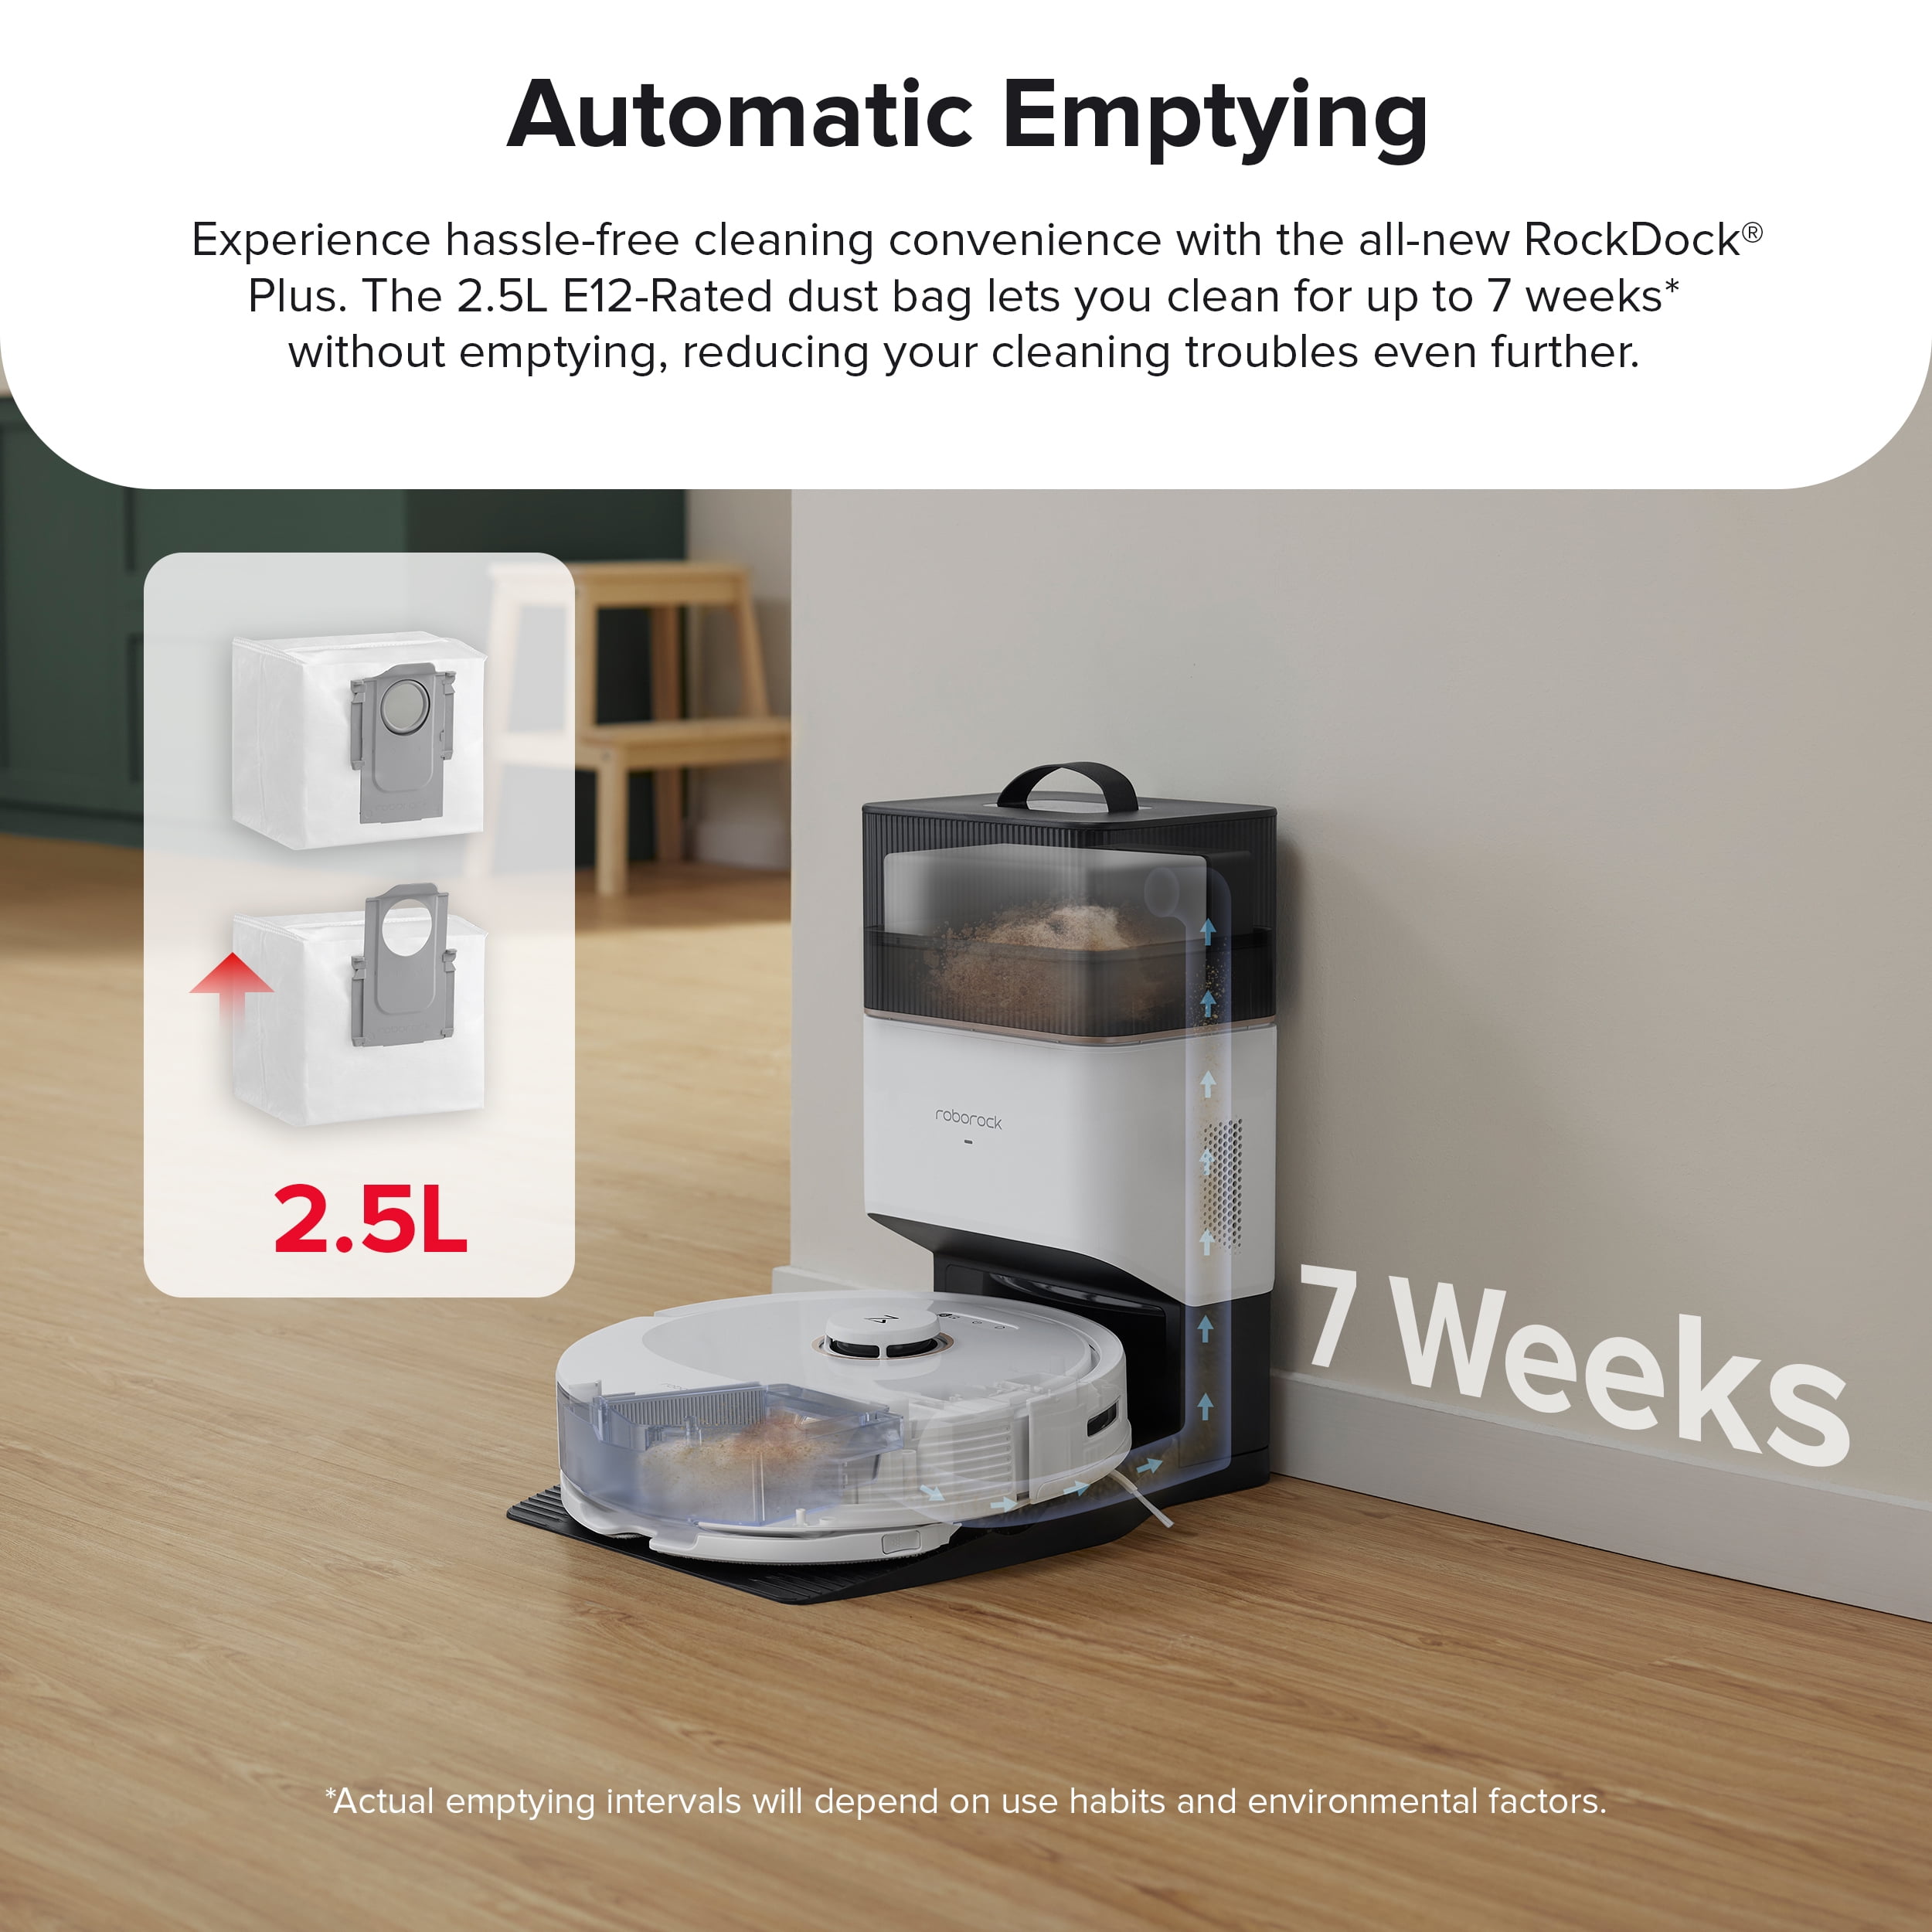  roborock Q8 Max+ Robot Vacuum and Mop, Self-Emptying,  Hands-Free Cleaning for up to 7 Weeks, Reactive Tech Obstacle Avoidance,  5500 Pa Suction, DuoRoller Brush, APP-Controlled Mopping, White